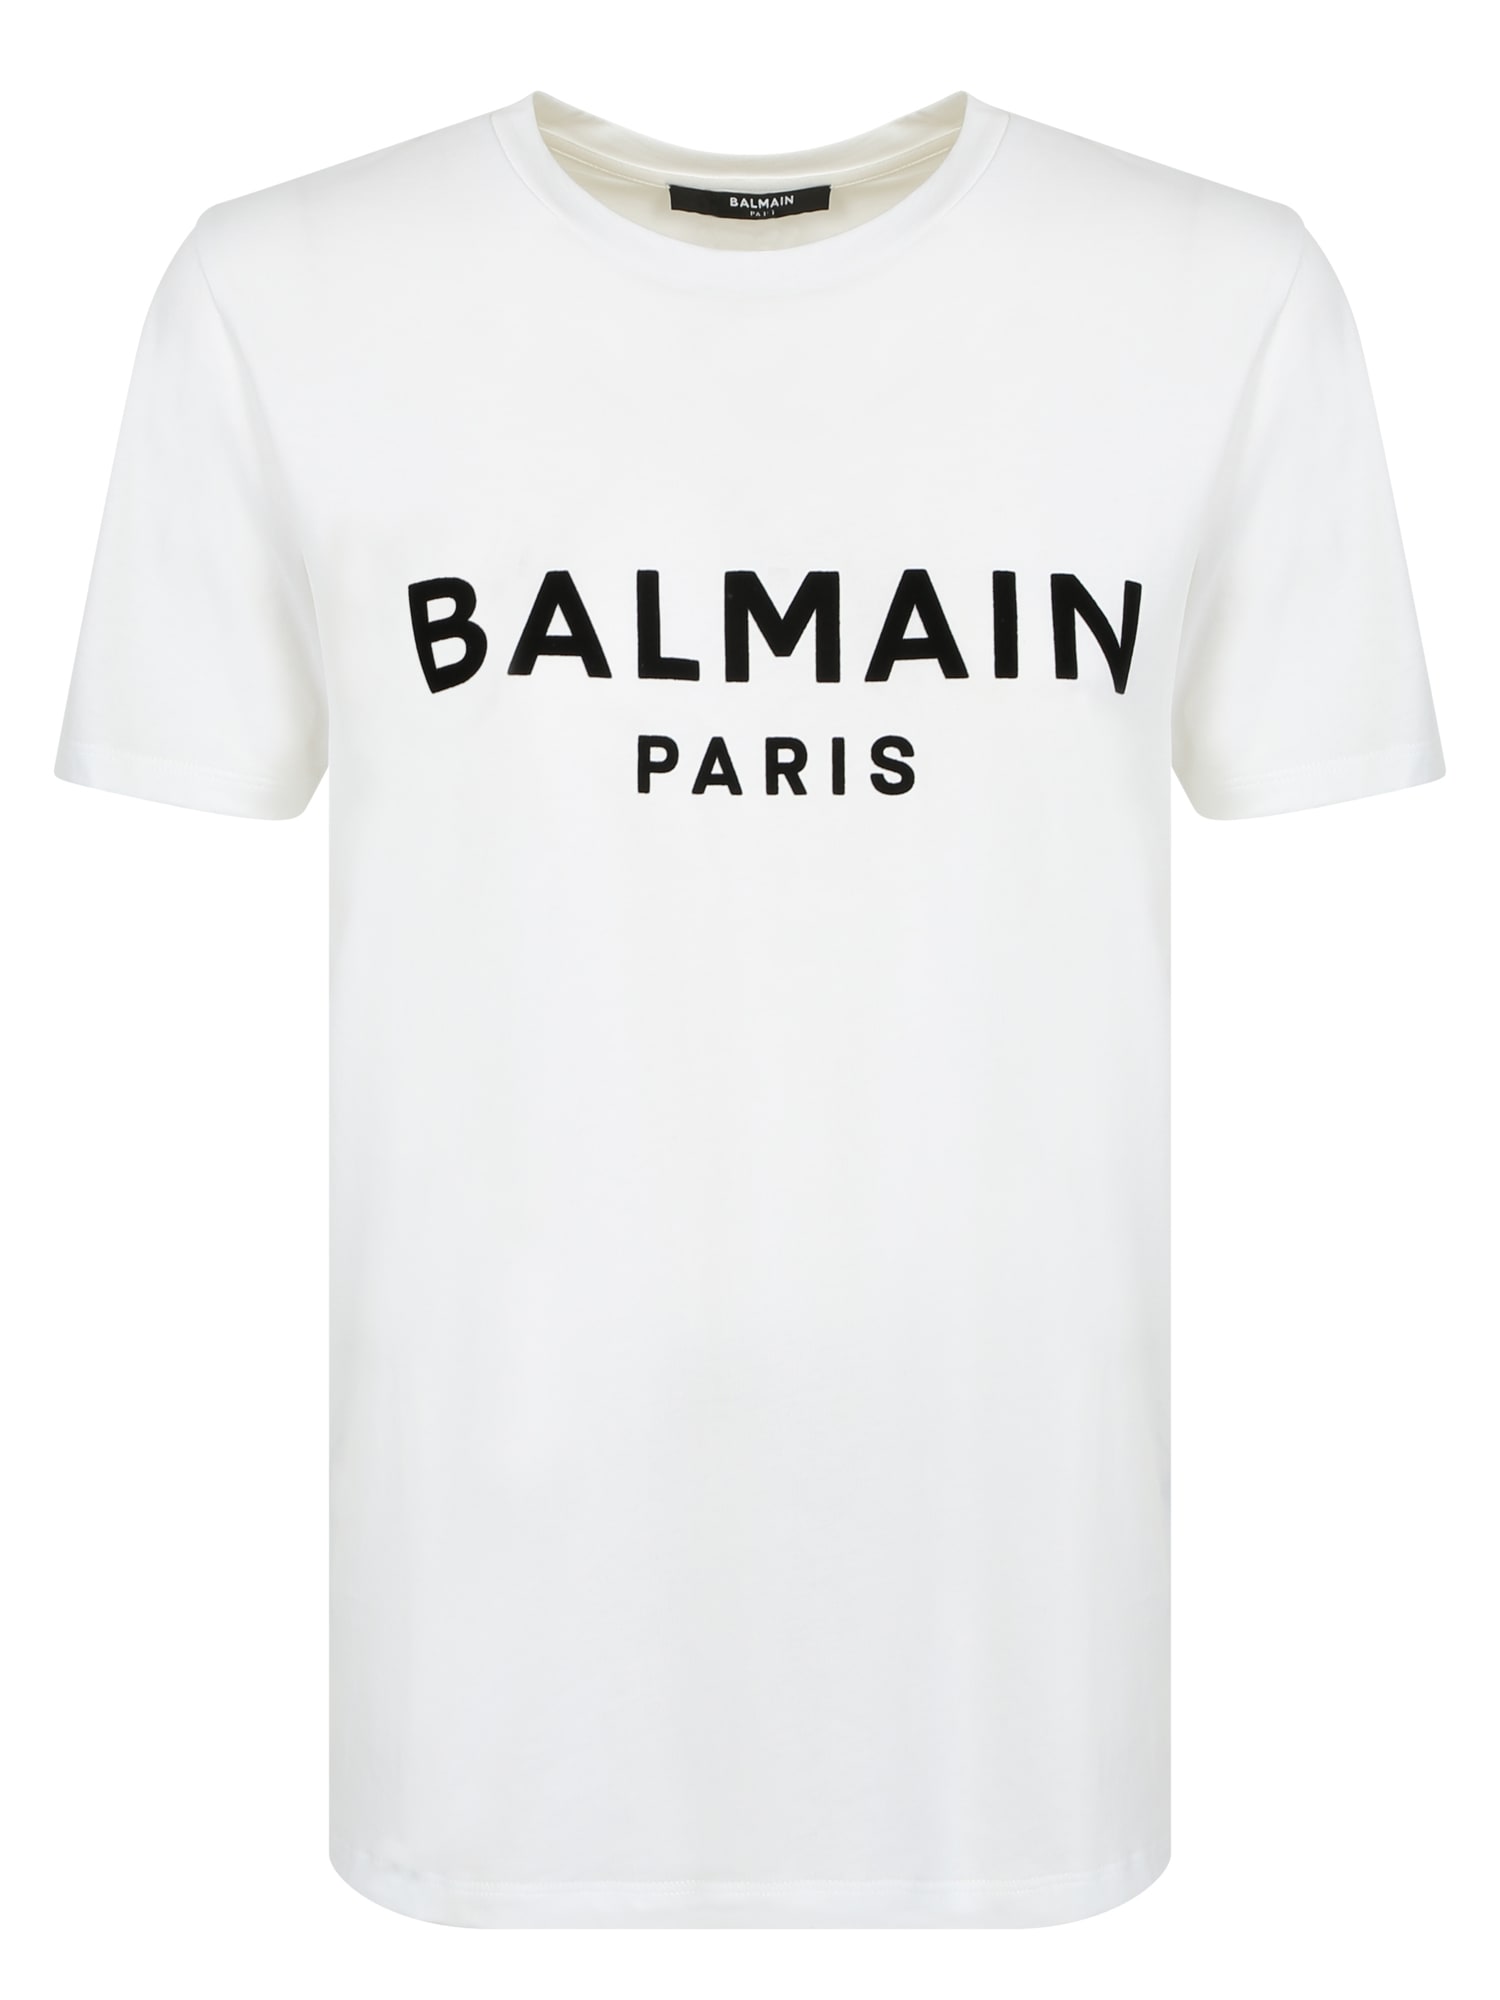 Balmain Flocked T-shirt By; Iconic, Unmistakable And Timeless Logo That Makes The Garment Versatile And Casual